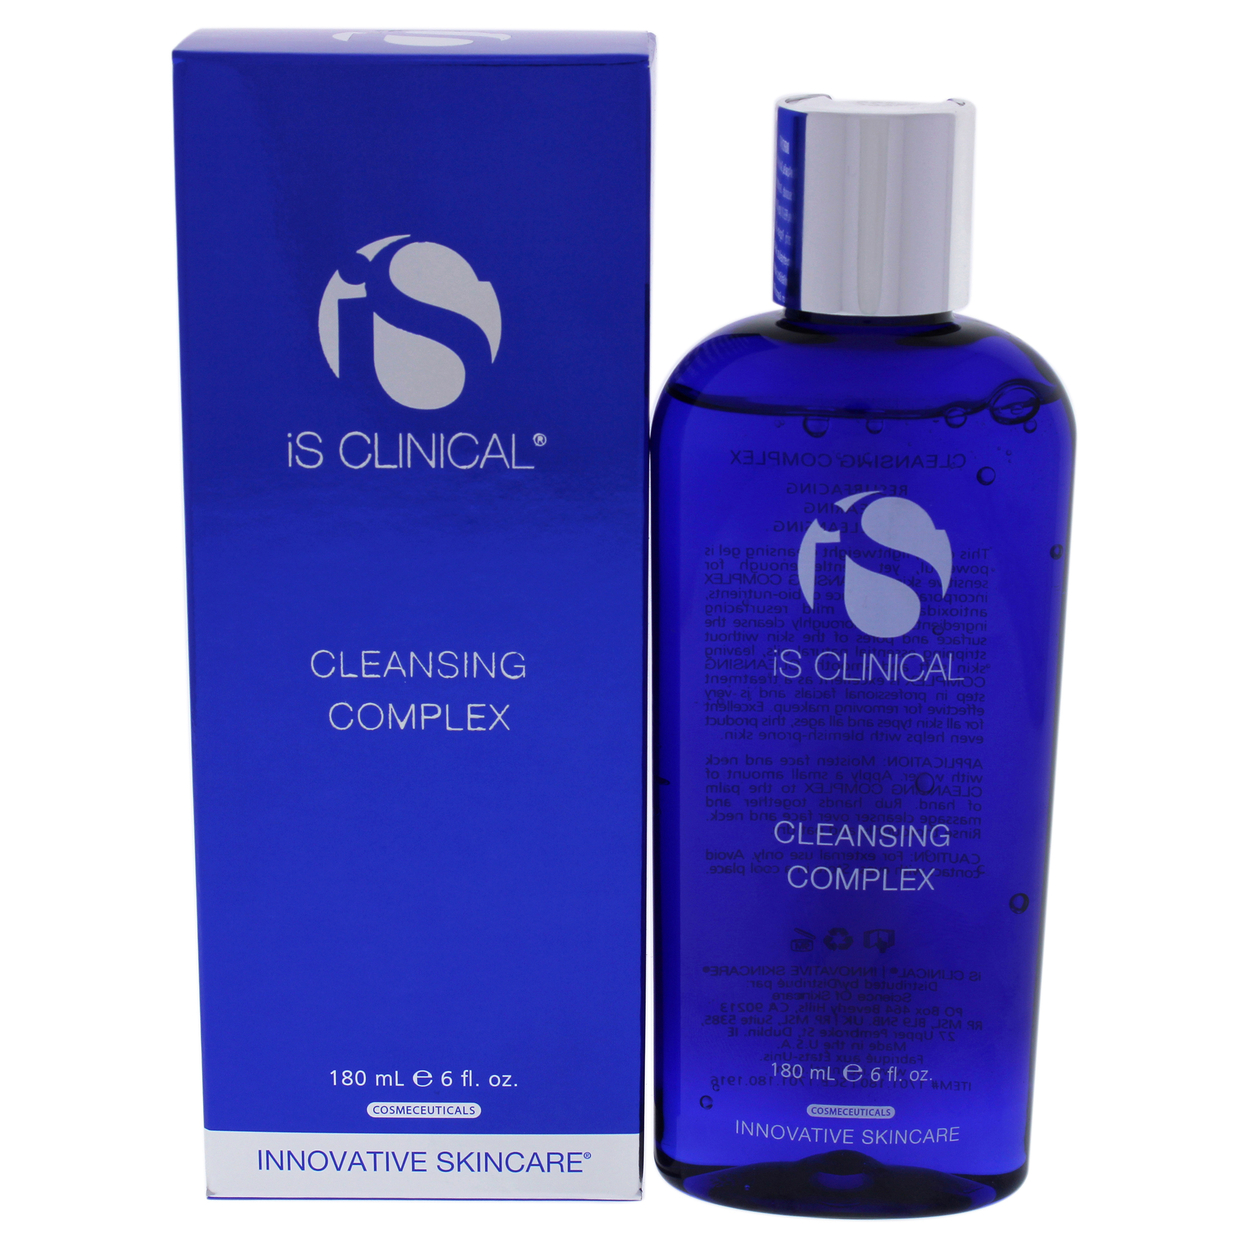 IS Clinical Unisex SKINCARE Cleansing Complex 6 Oz